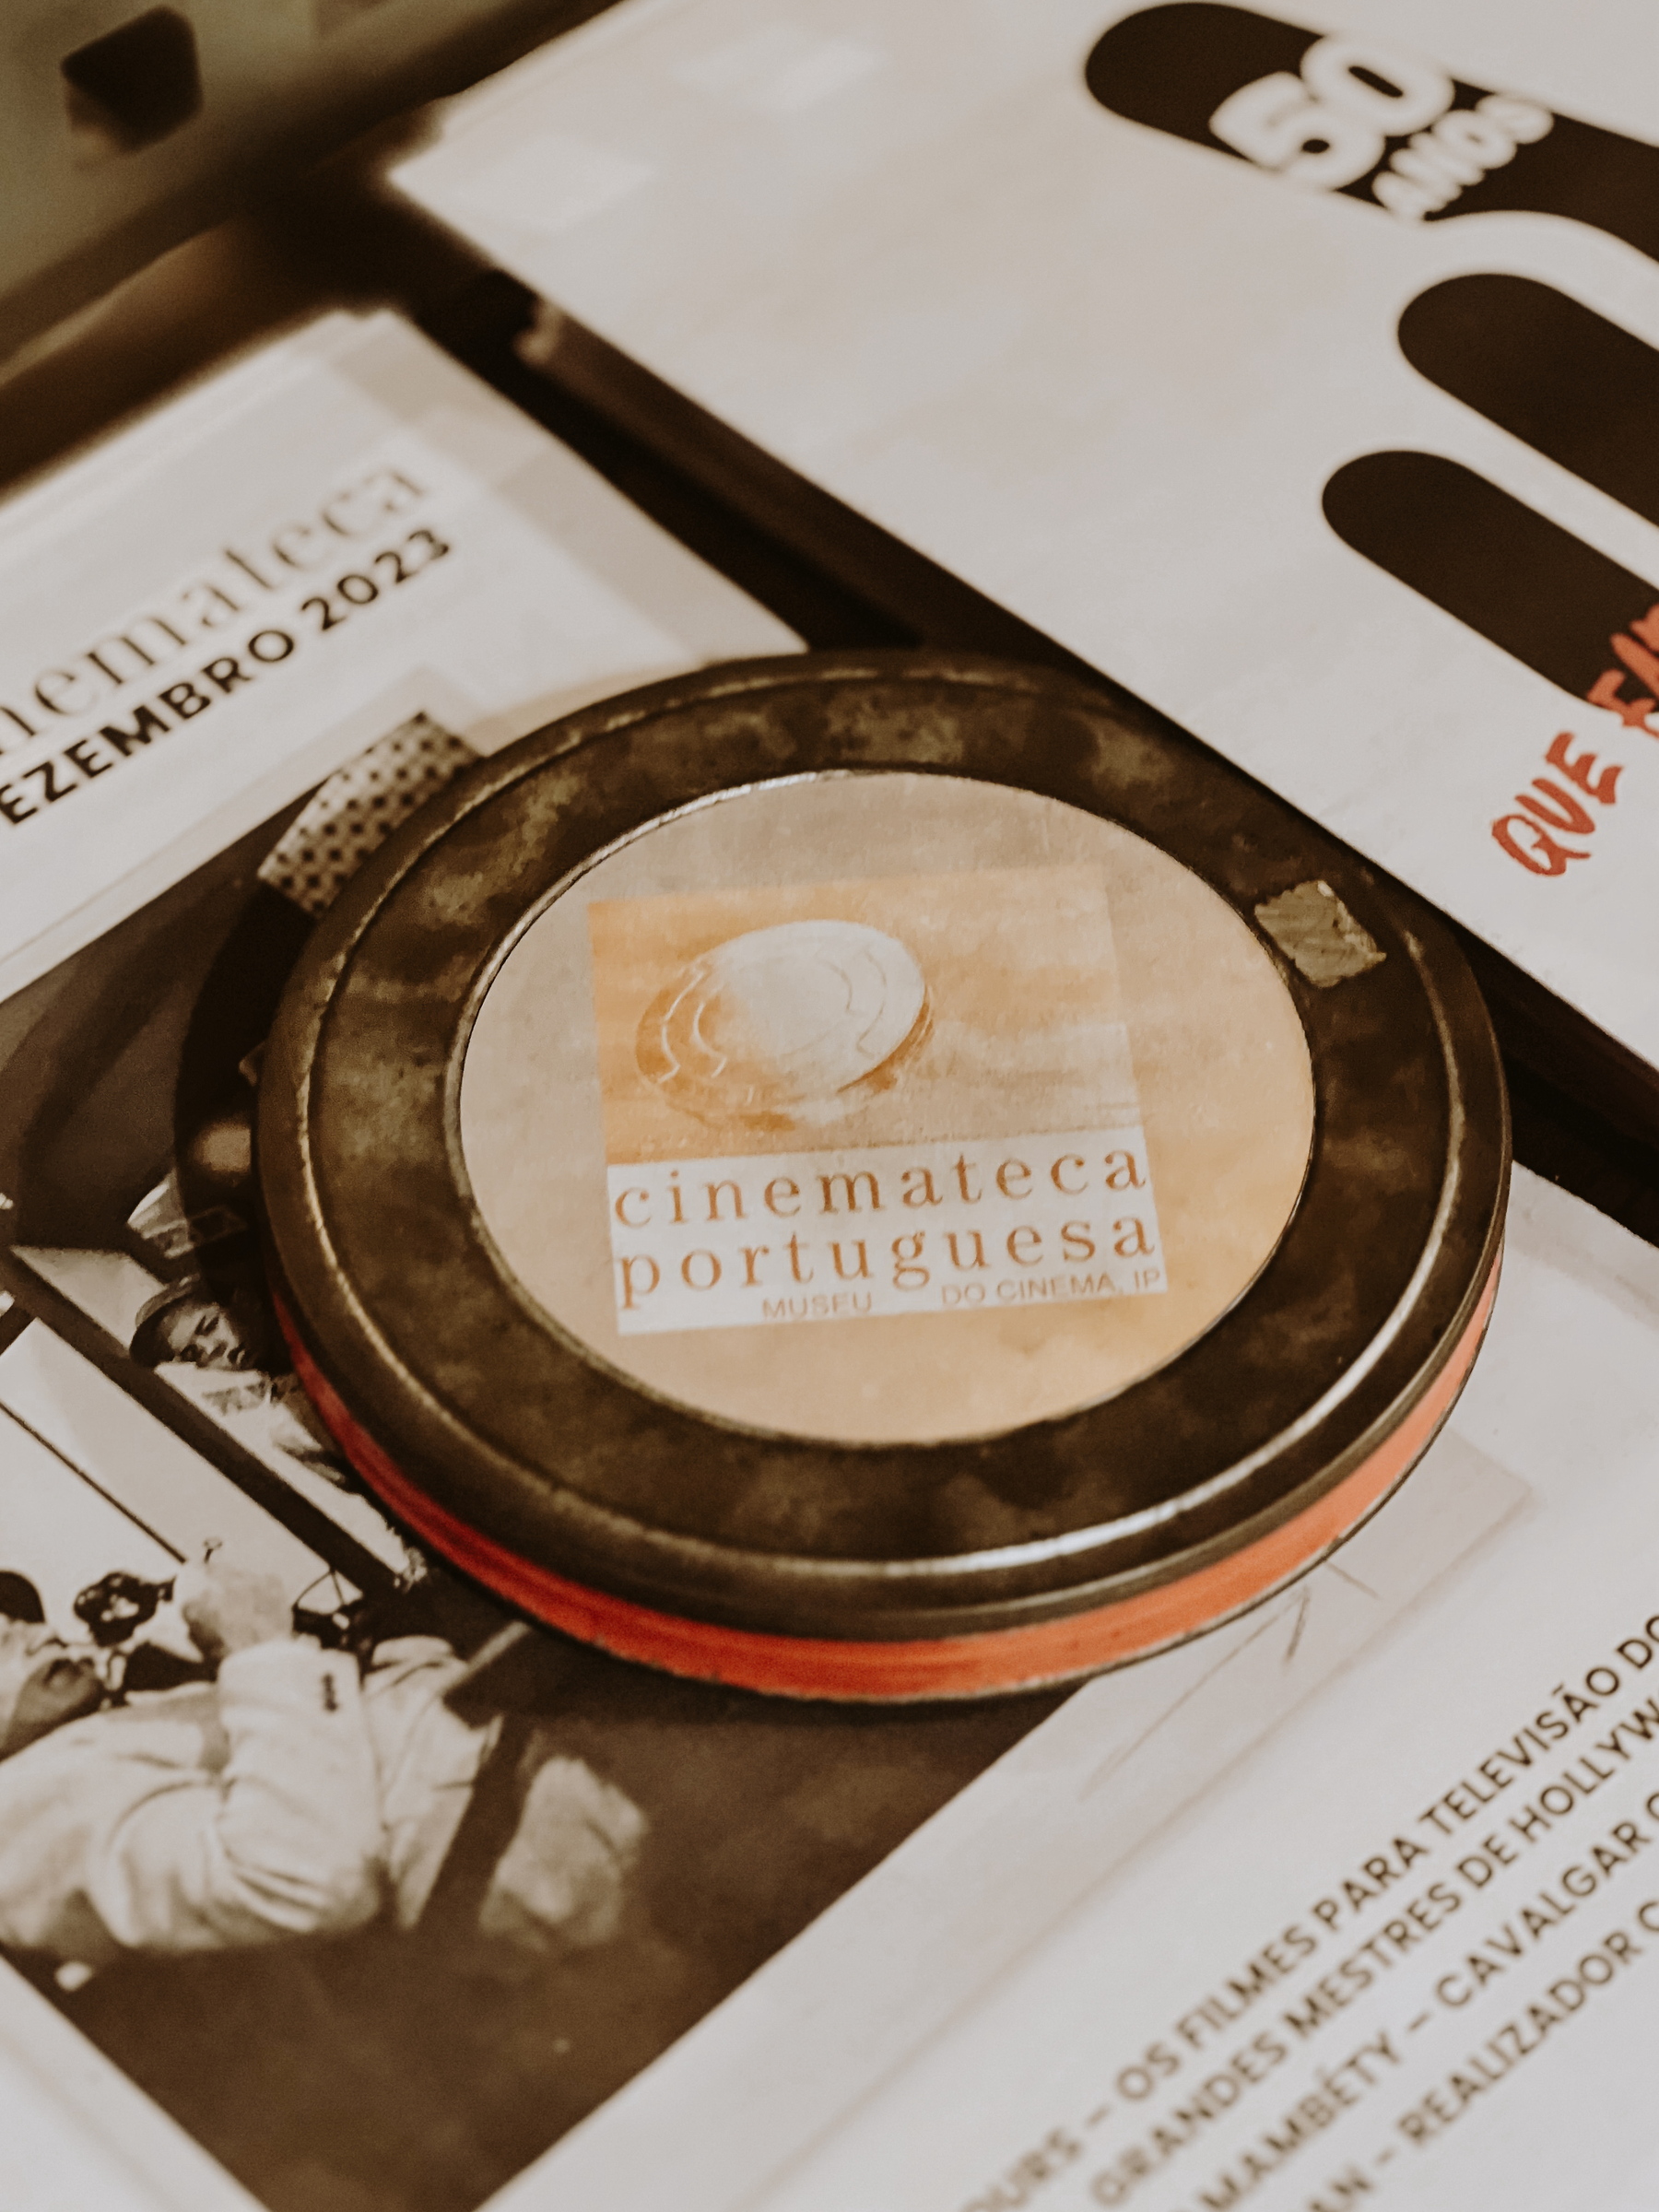 An old film canister on top of brochures or flyers, with text related to the &ldquo;Cinemateca Portuguesa&rdquo; (Portuguese Film Archive) and cinema-related content visible.